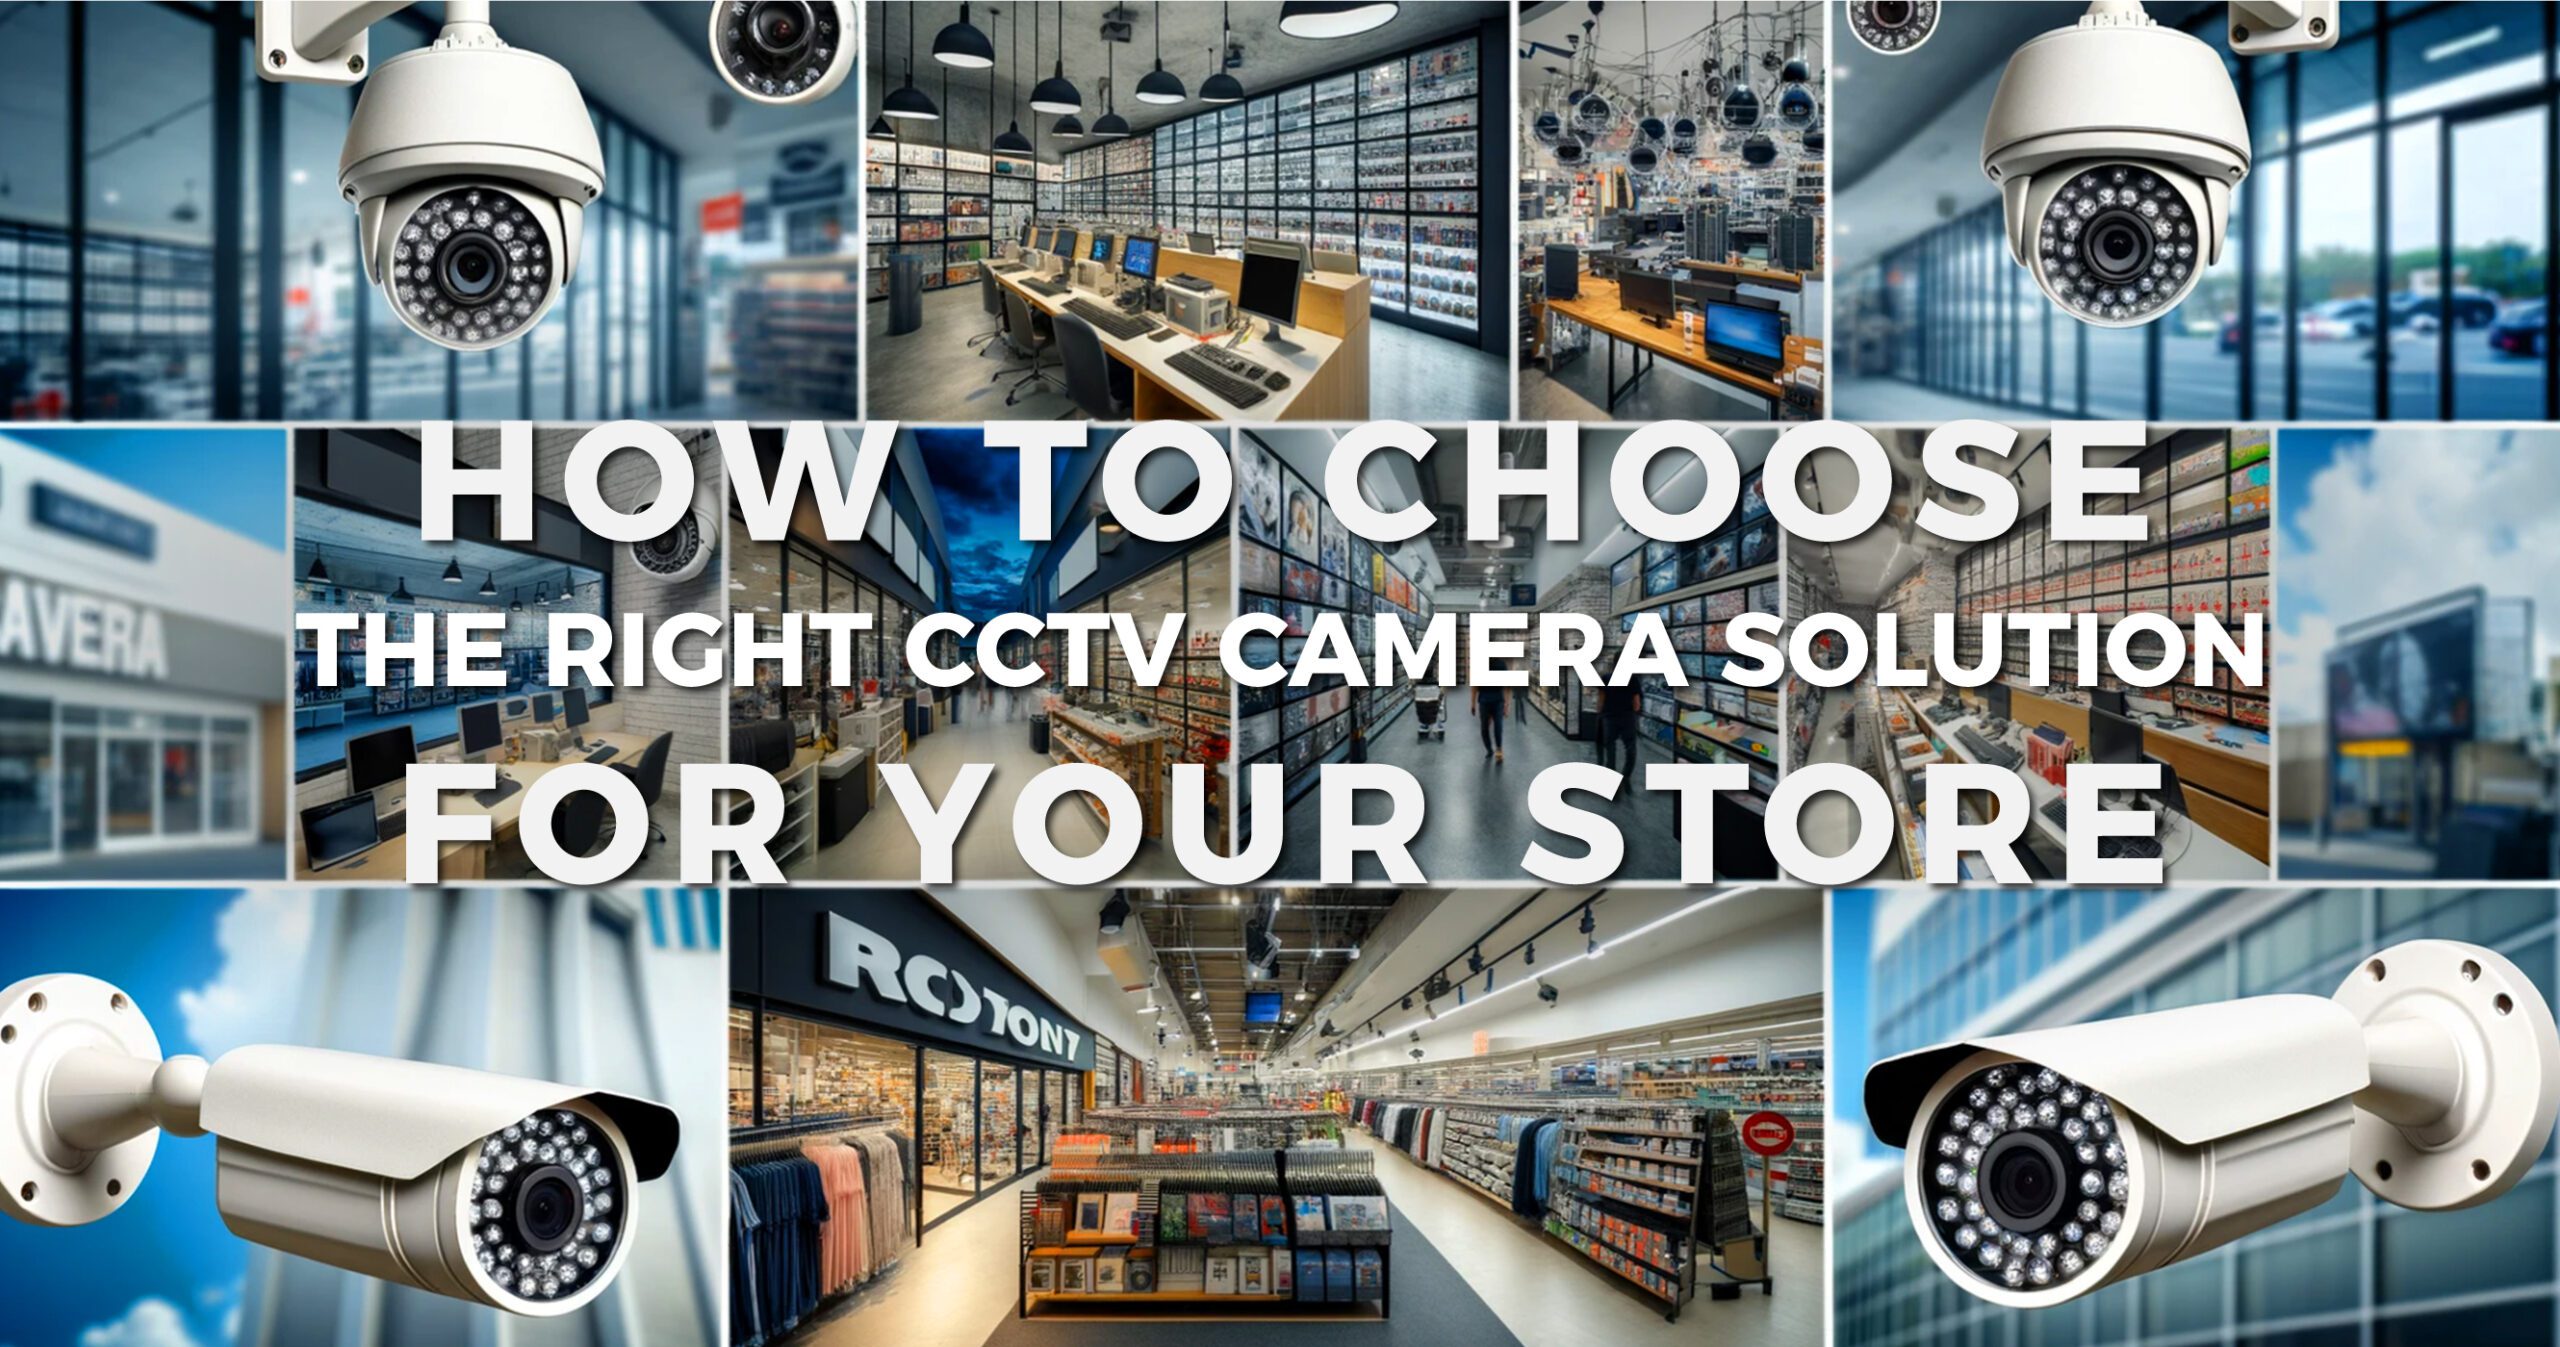 Featured image for “How to Choose the Right CCTV Security Camera Solution for your Store”